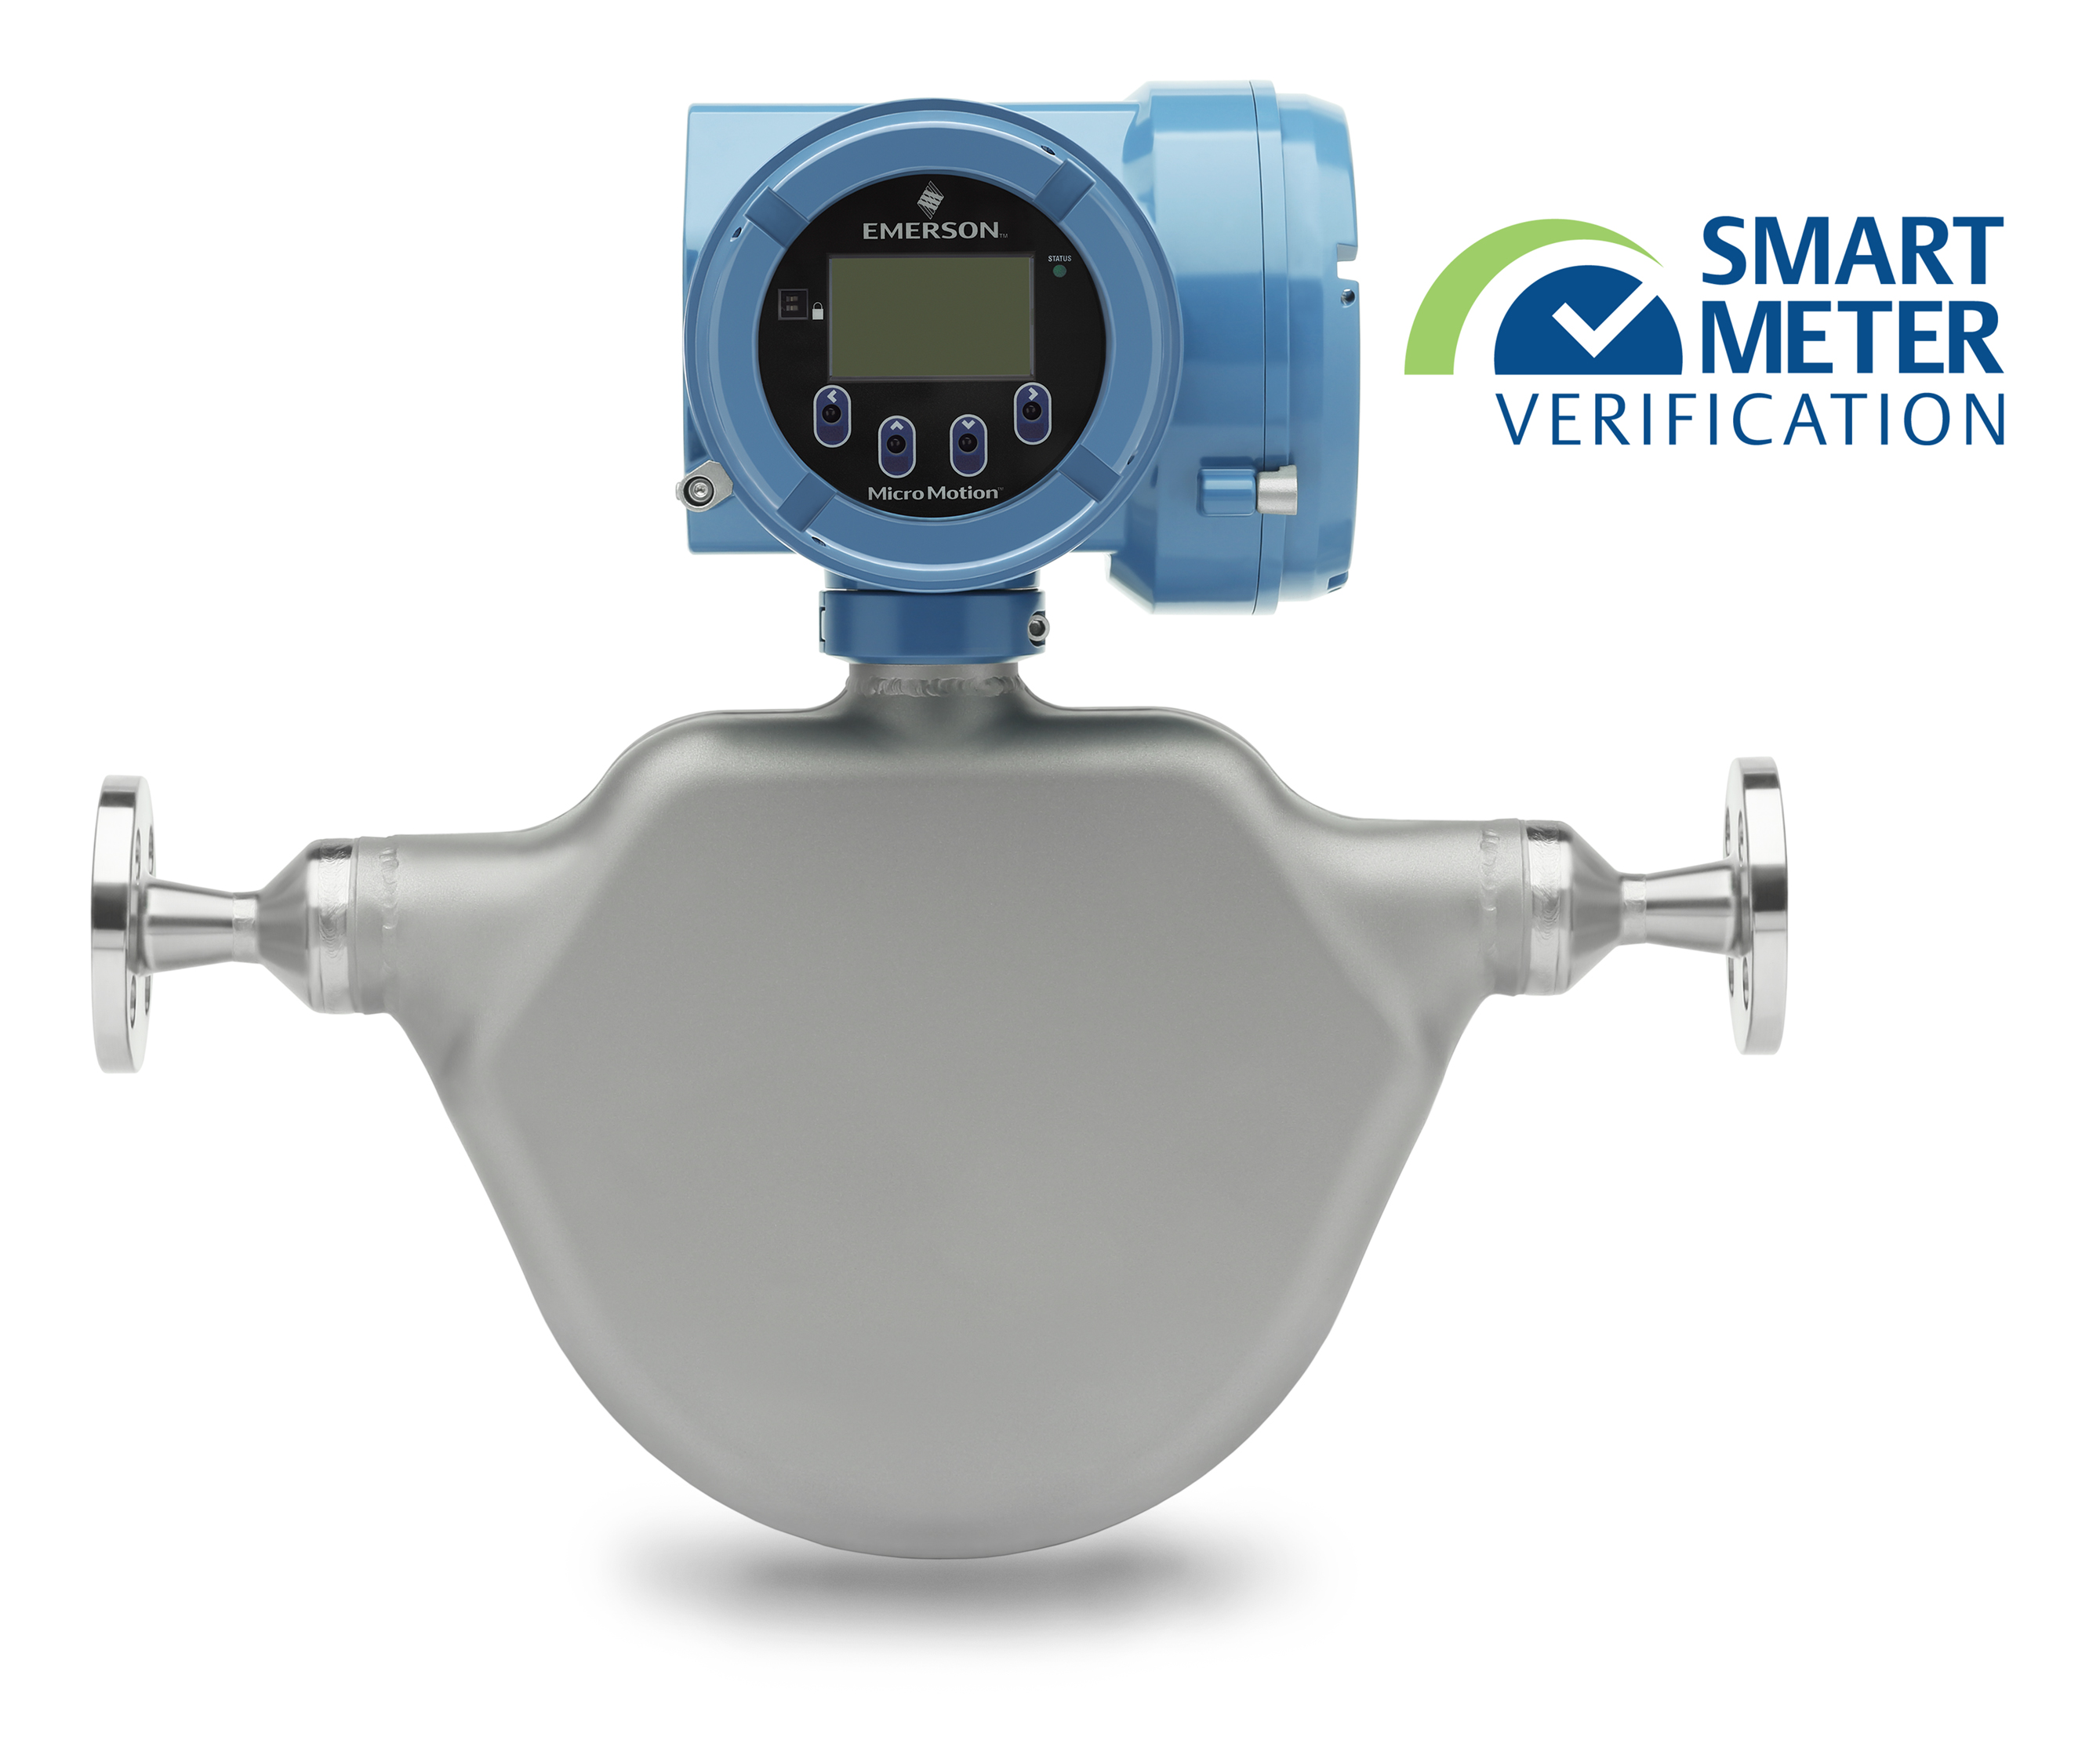 Emerson Introduces Powerful Diagnostics for Flow Meter Intelligence and